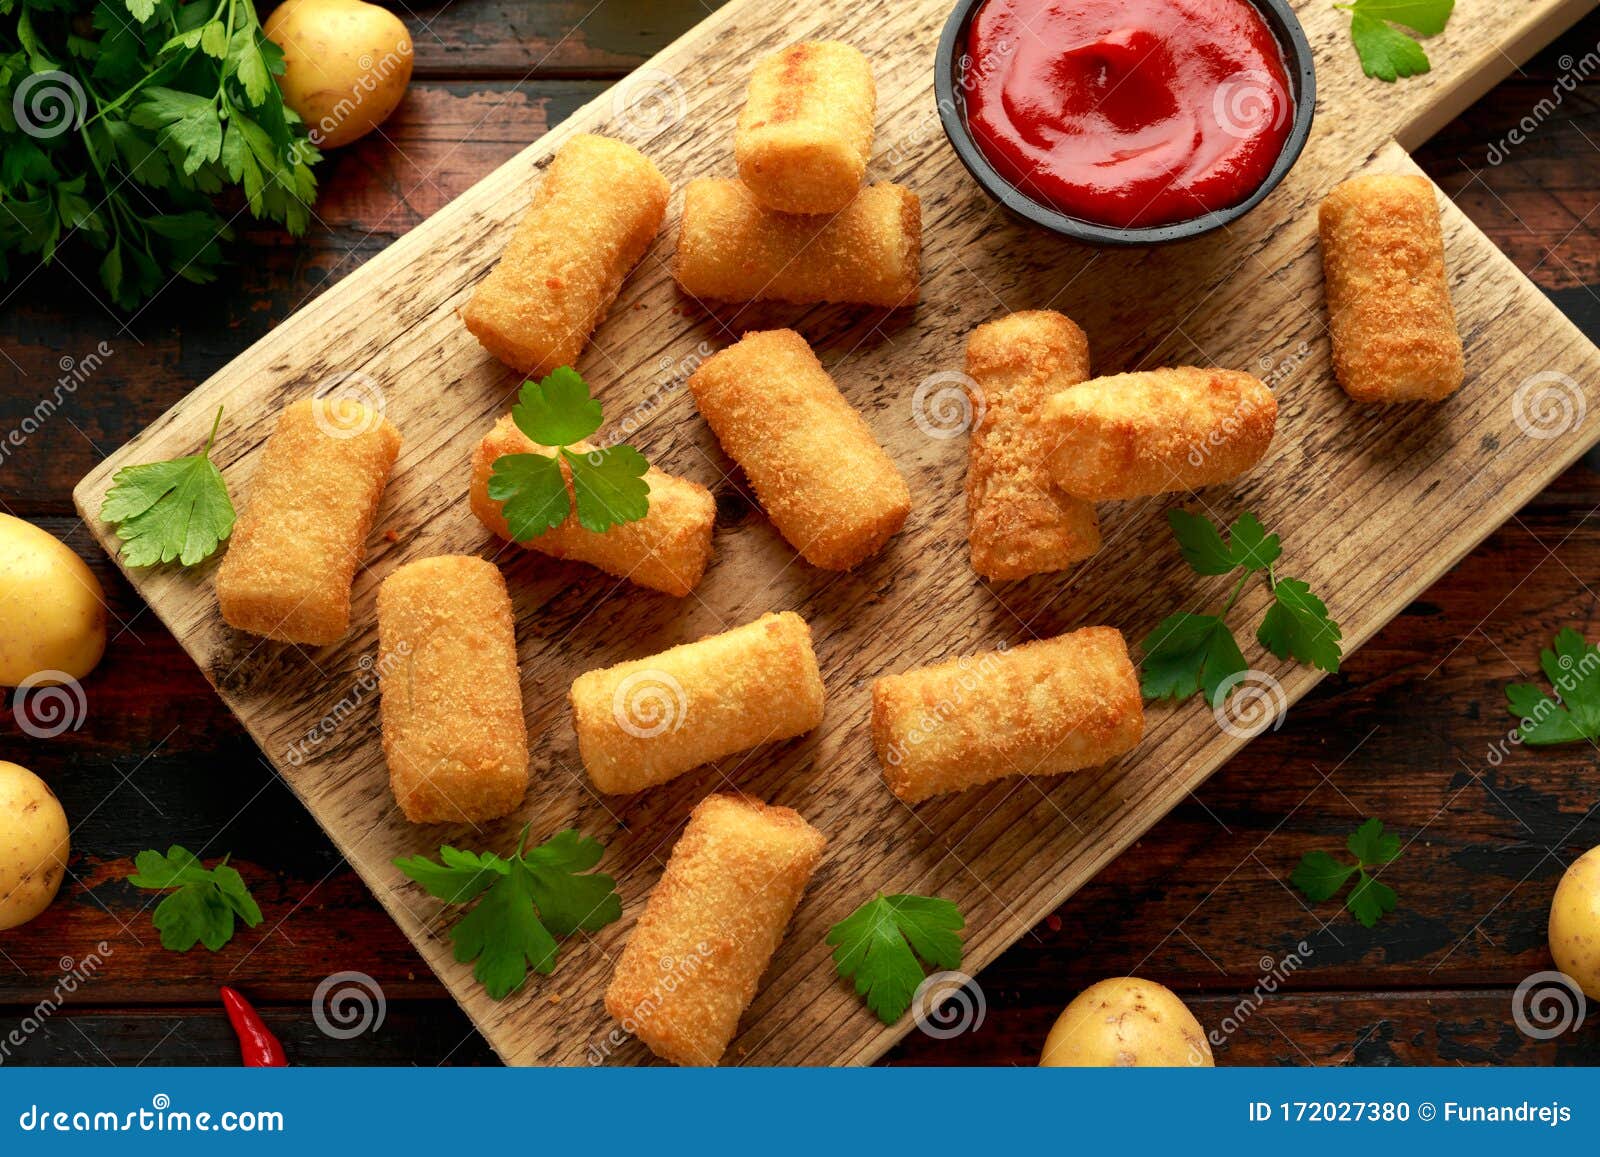 homemade potato croquettes with dipping sauce on wooden board